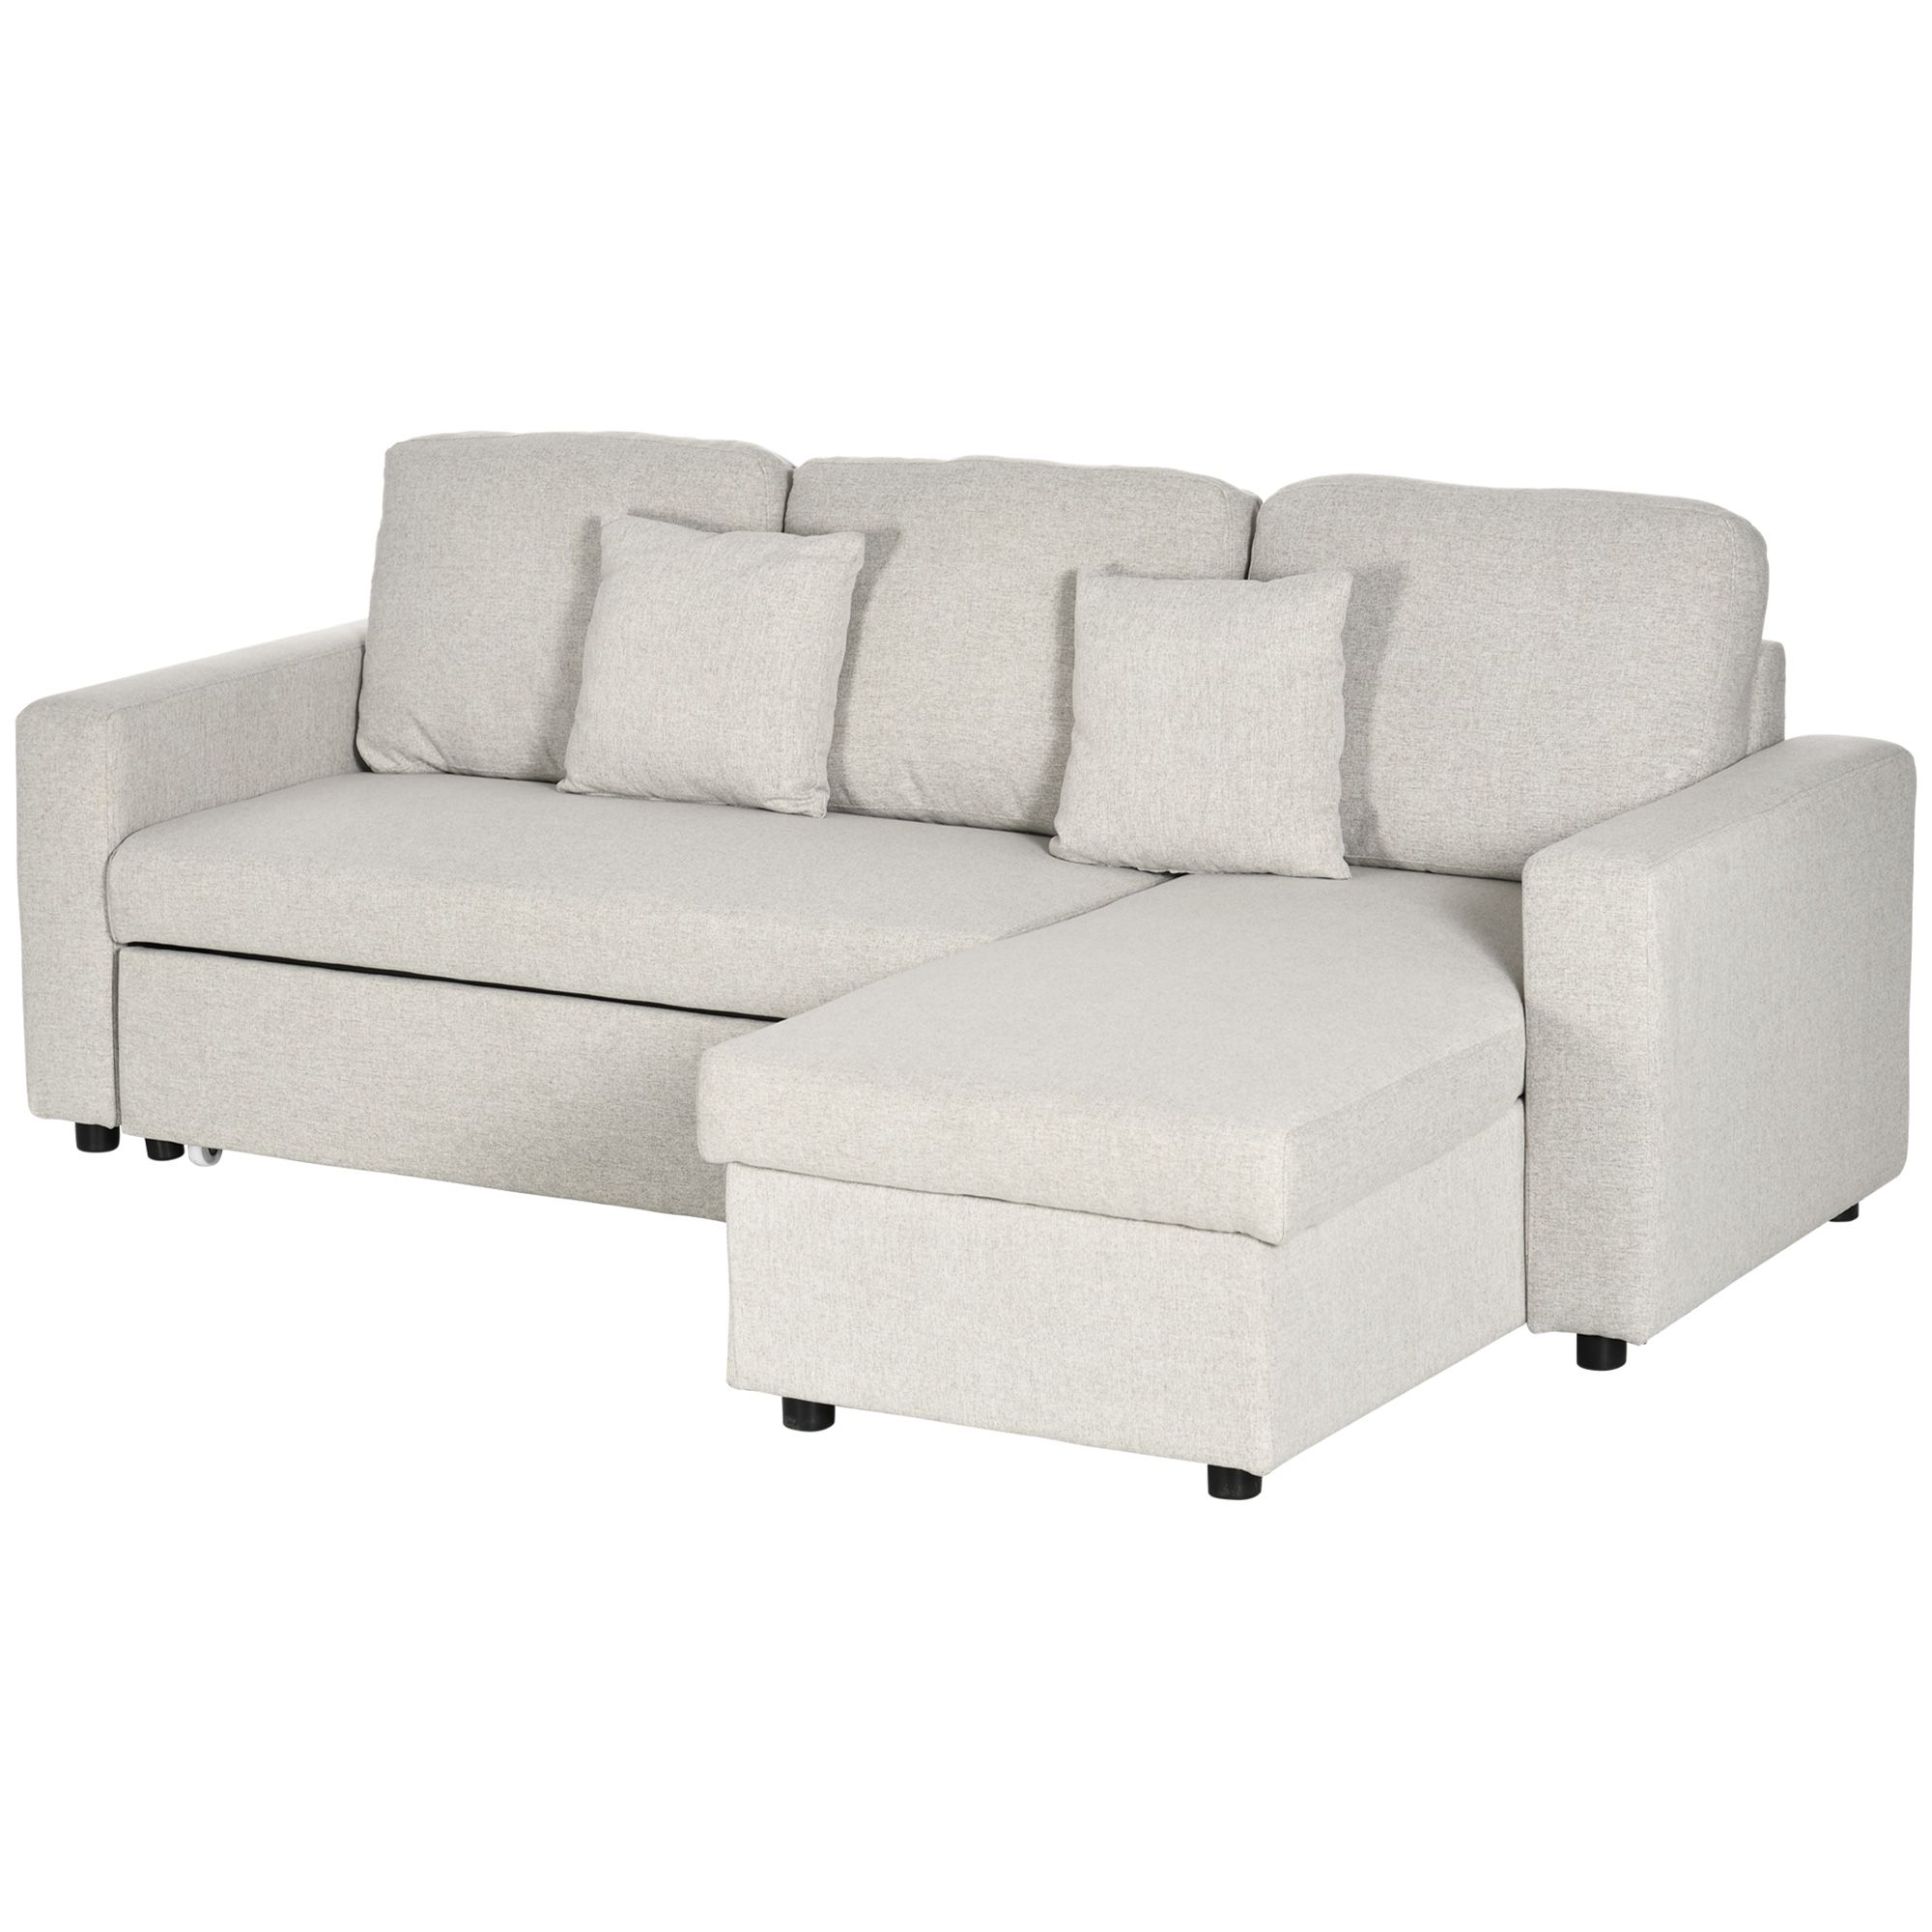 Homcom Sectional Sleeper Sofa, Linen Fabric L Shaped Couch With Pull Out  Bed, Reversible Storage Chaise For Living Room, Apartment, 3 Seat, Cream  White | Aosom Regarding Chaise 3 Seat L Shaped Sleeper Sofas (Gallery 18 of 20)